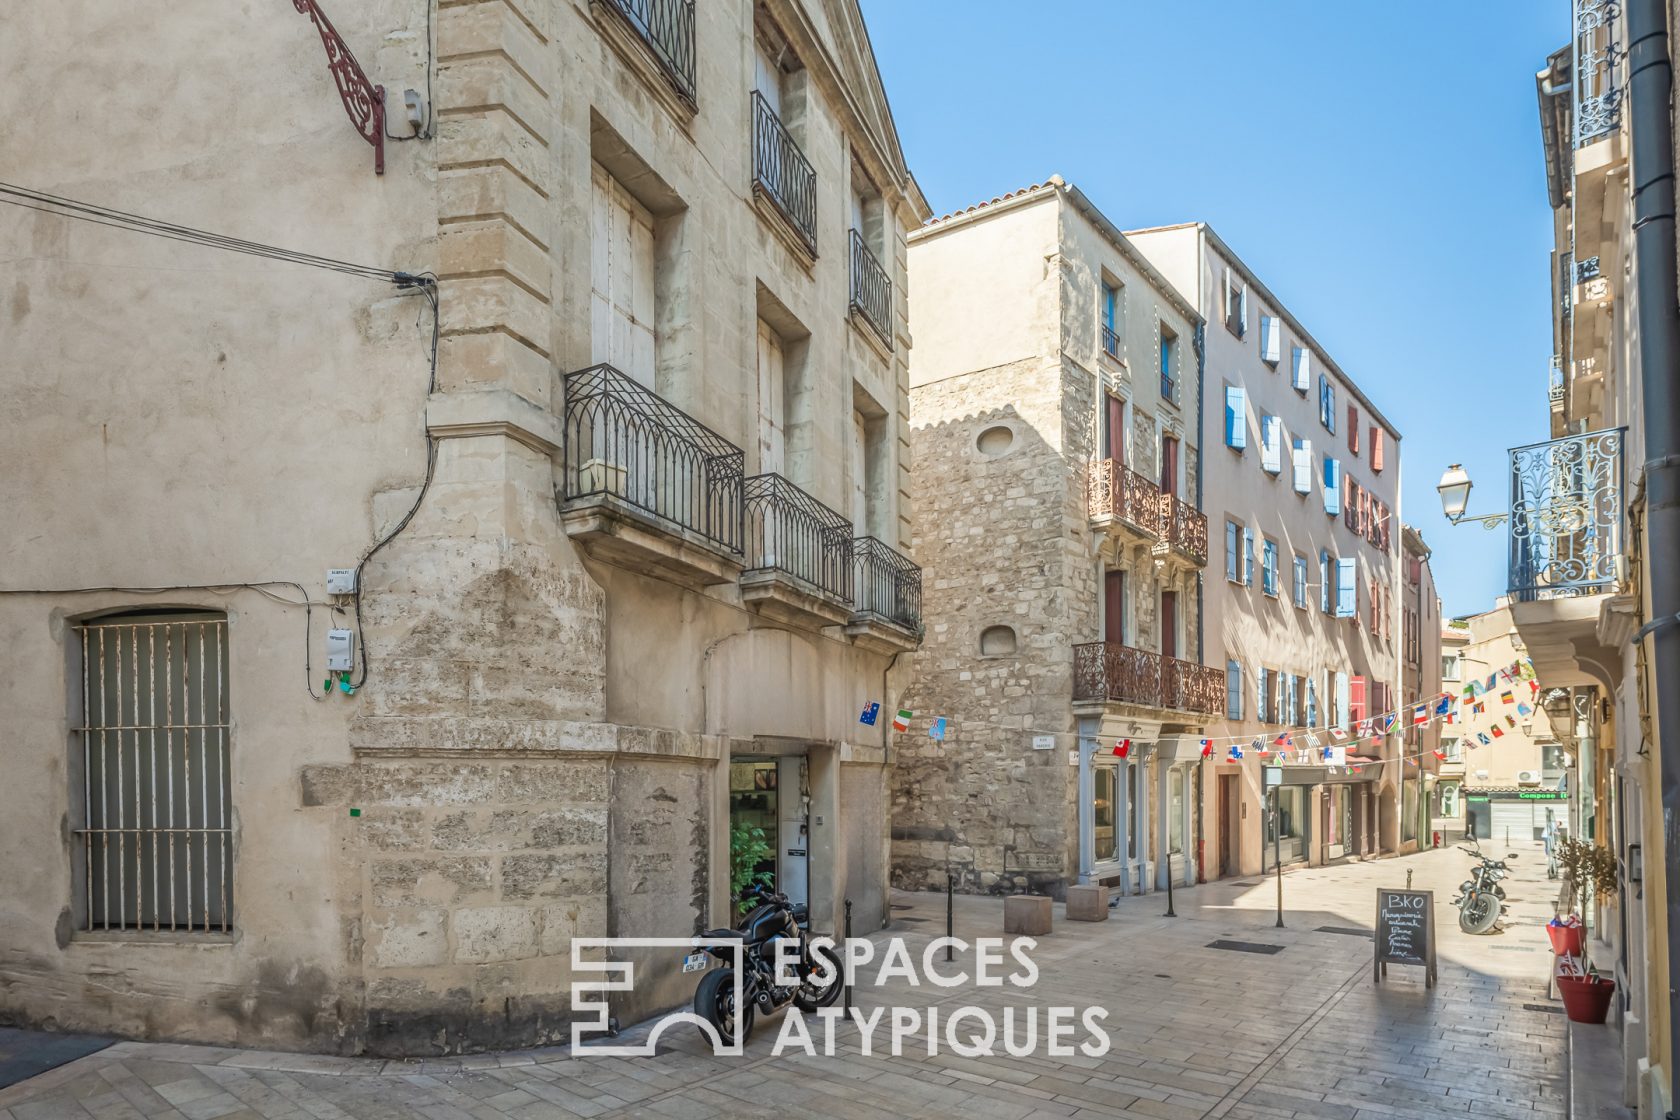 Building in the heart of the remarkable heritage of Narbonne